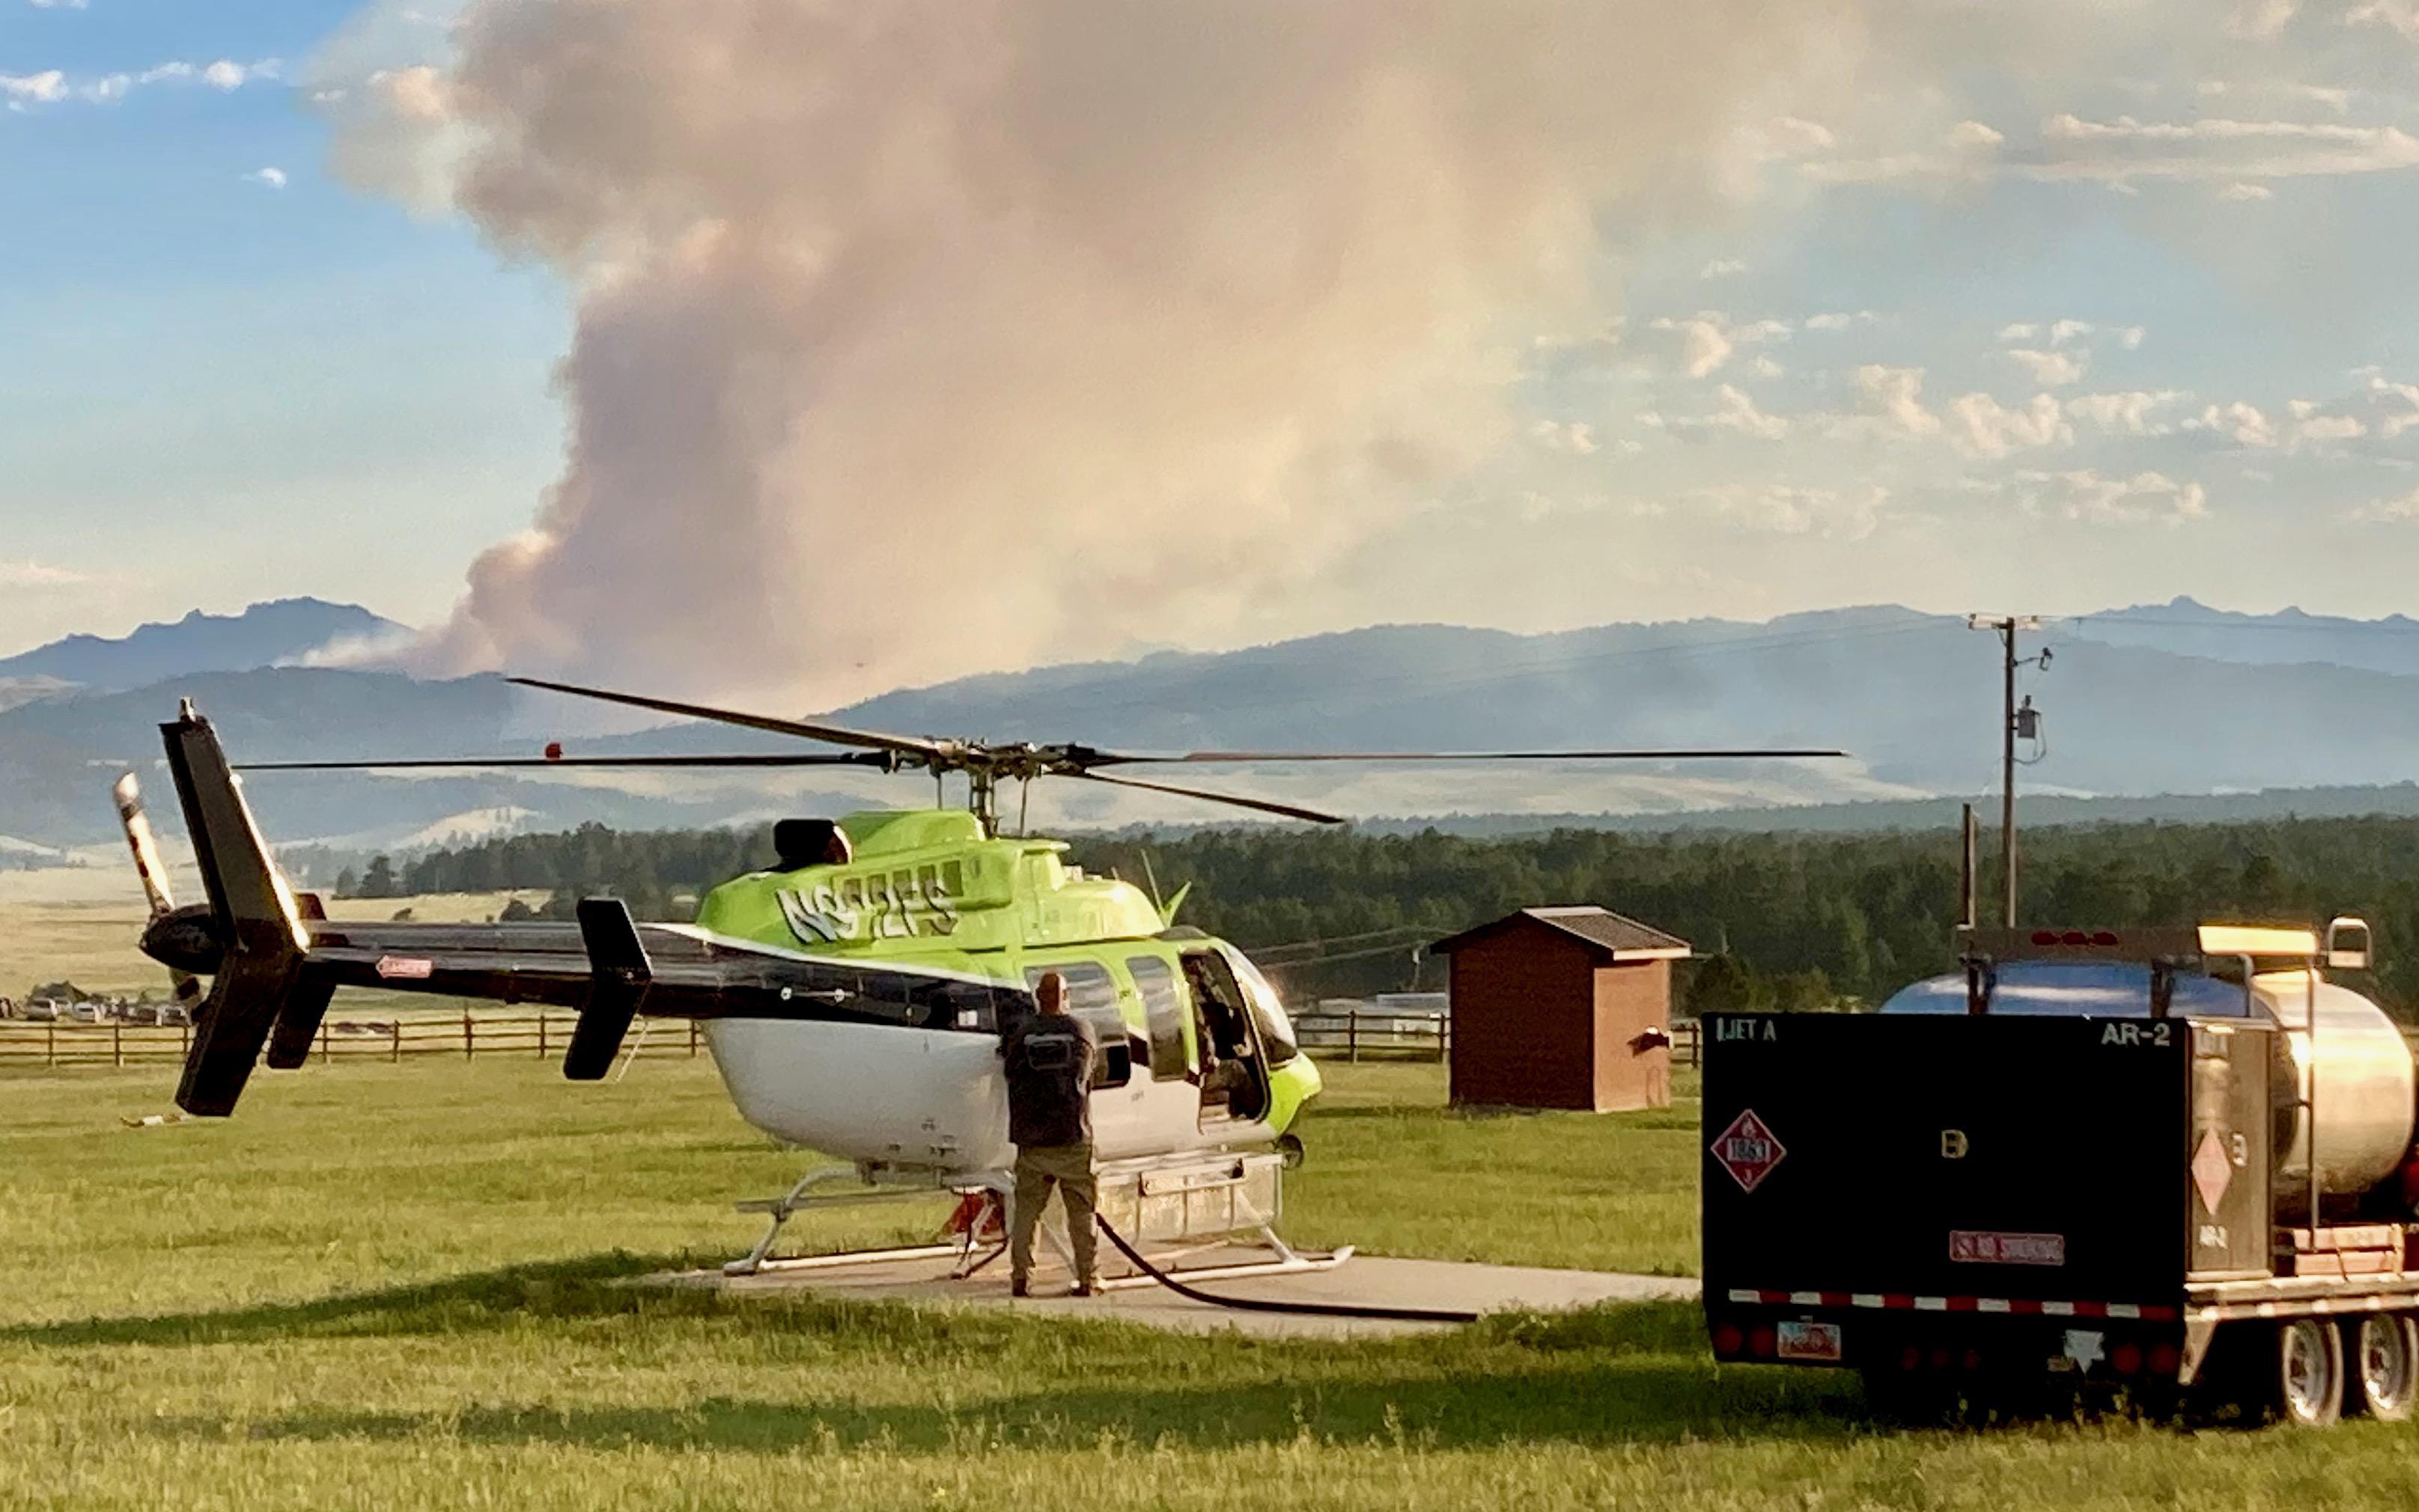 Green, black and white type one helicopter fuels up at Esterbrook Work Center, with a smoke column billowing up from the mountains in the background.